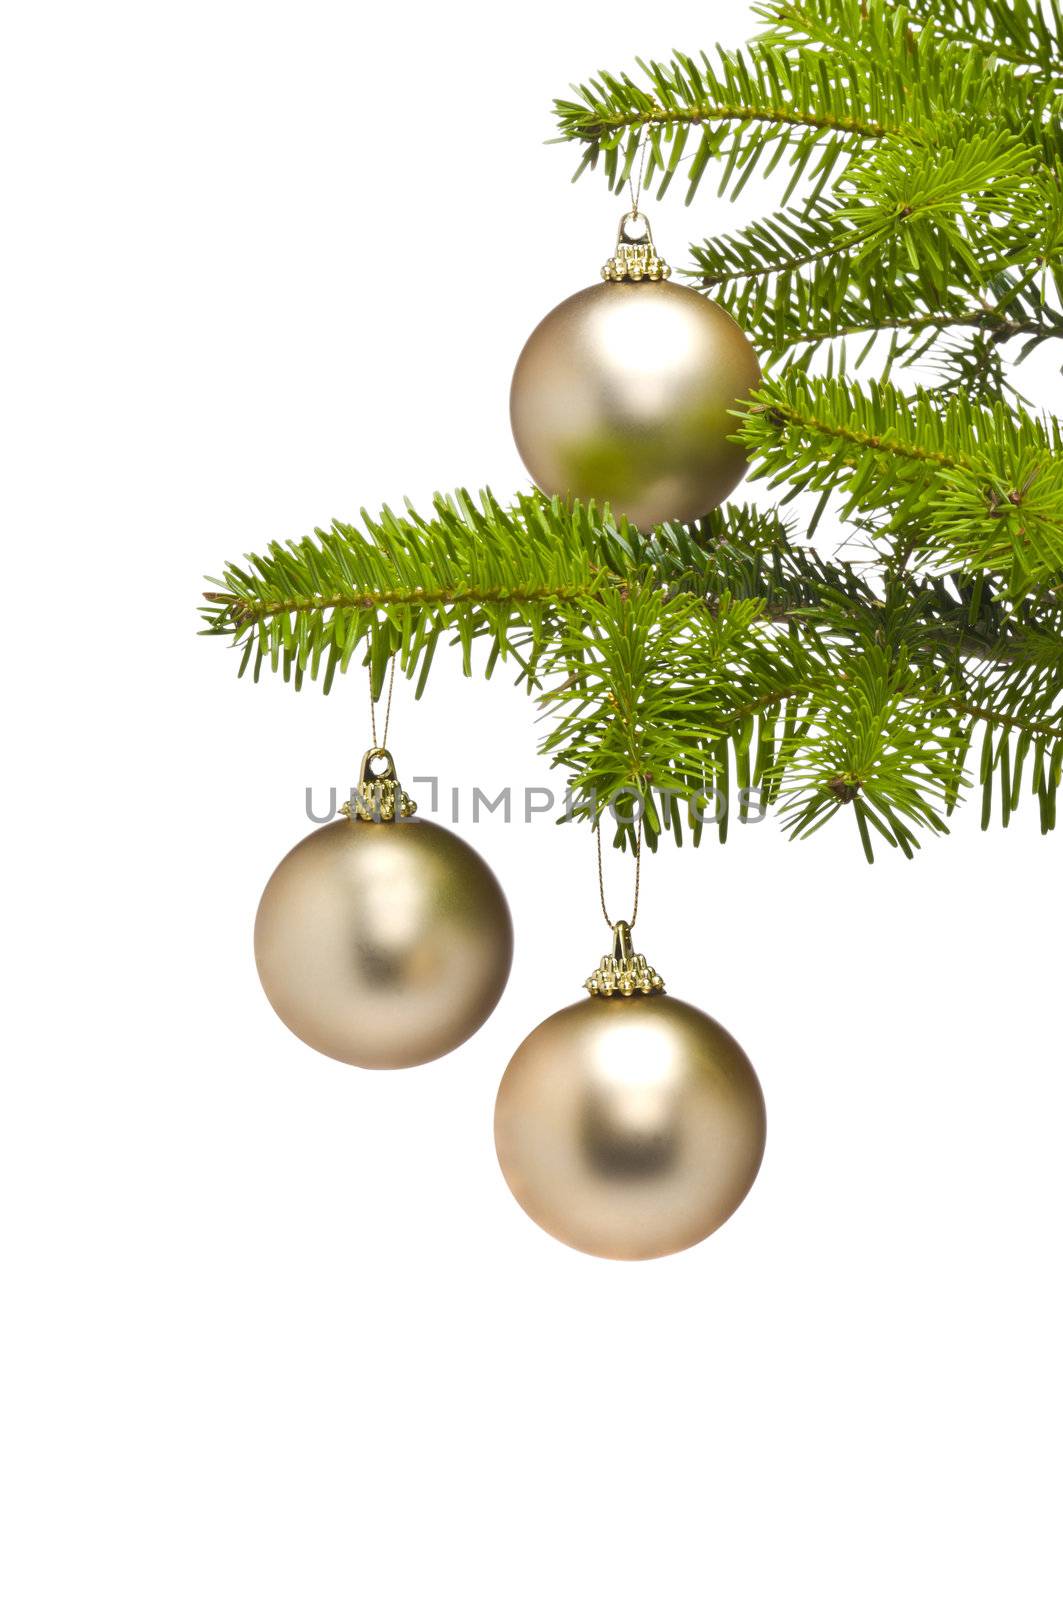 Three golden decoration balls in Christmas tree branch with negative space